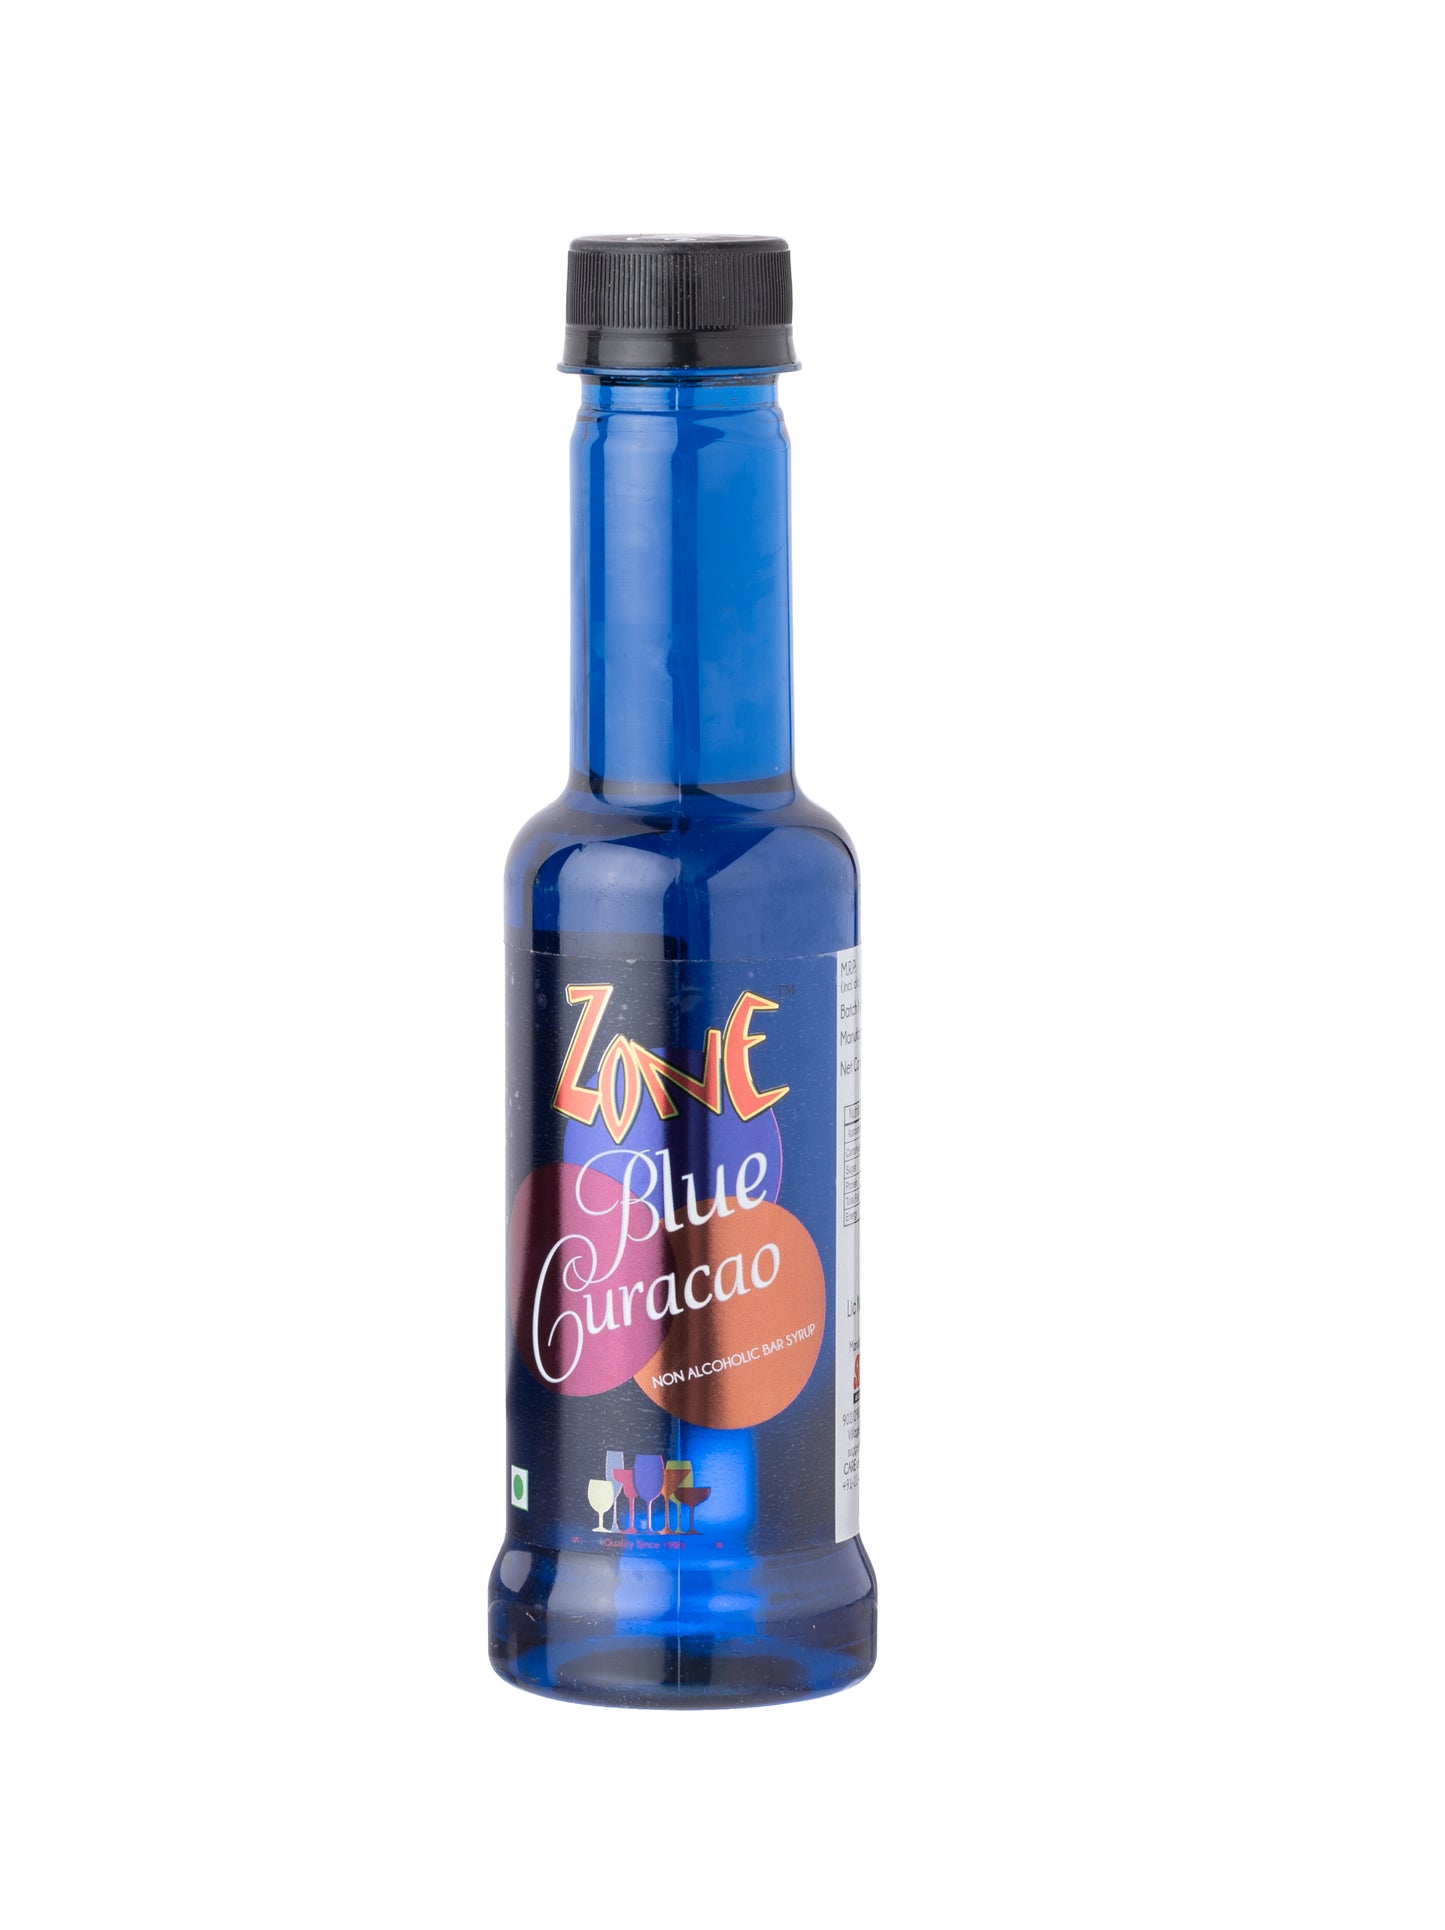 Zone Blue Curacao Flavoured Syrup 240ml